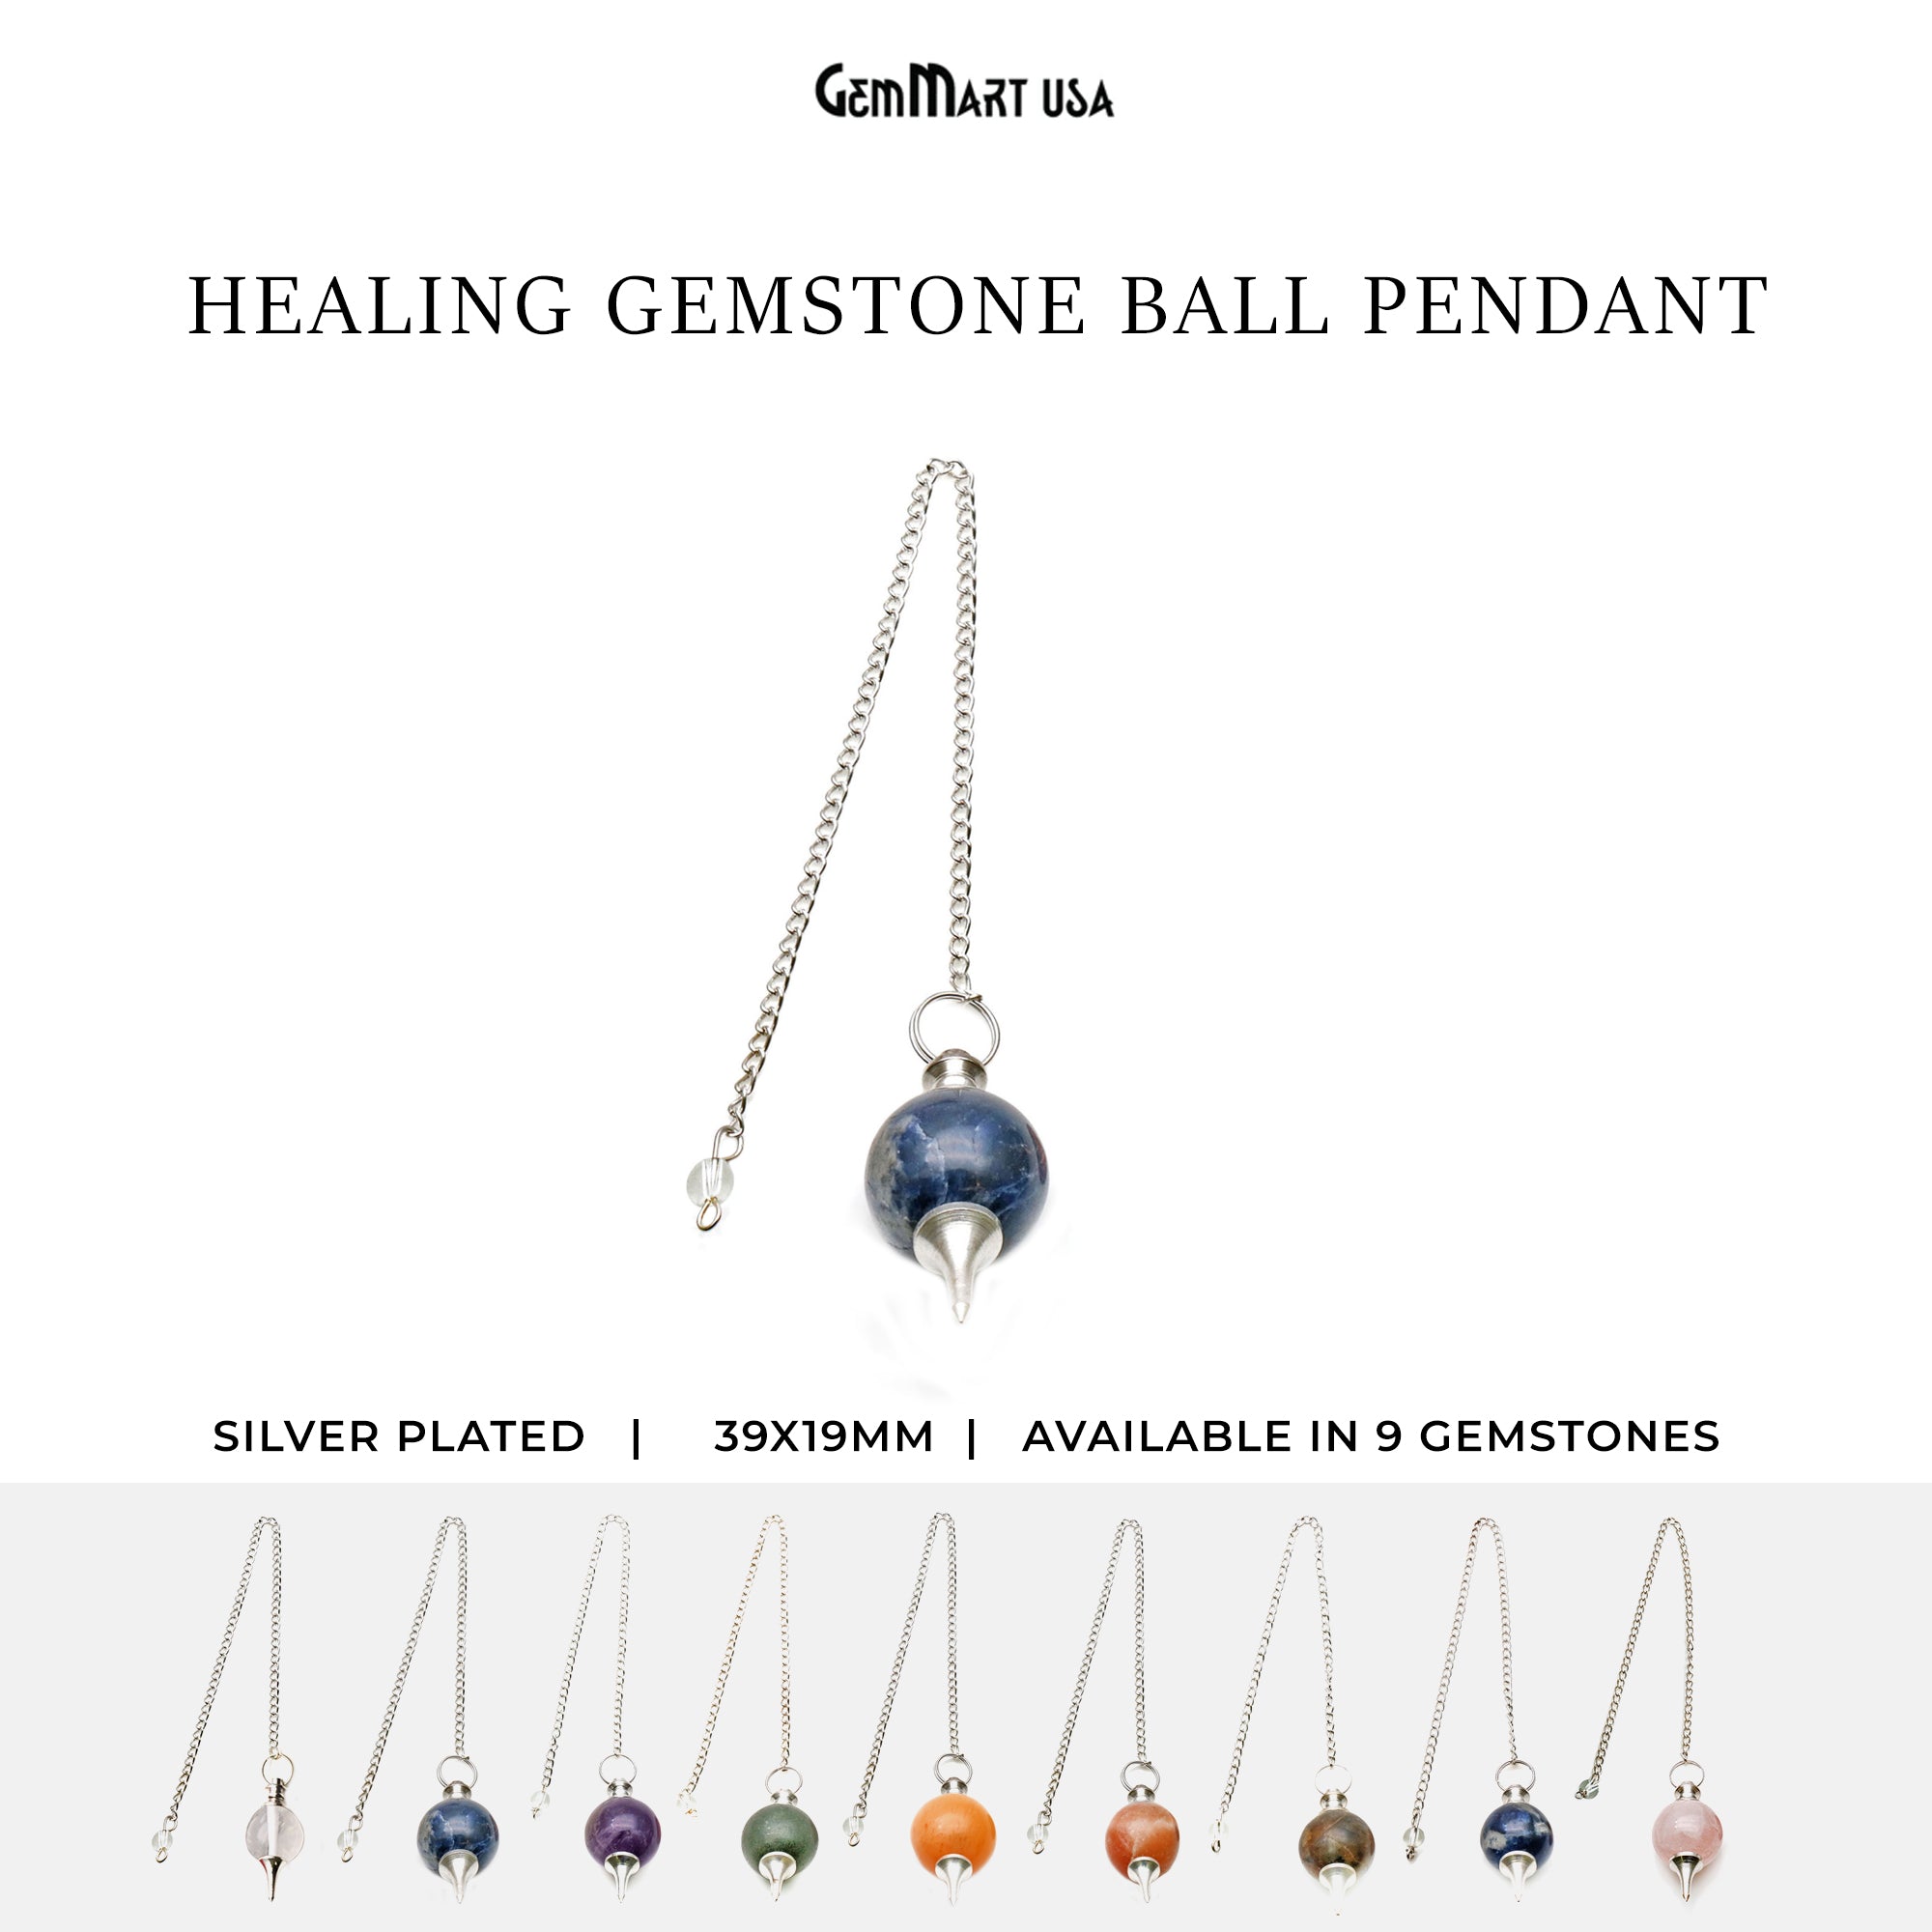 Handcrafted Crystal Ball 39x19mm Healing Dowsing Pointed Pendulum Pendant Silver Plated Chain Ball Shaped Gemstone